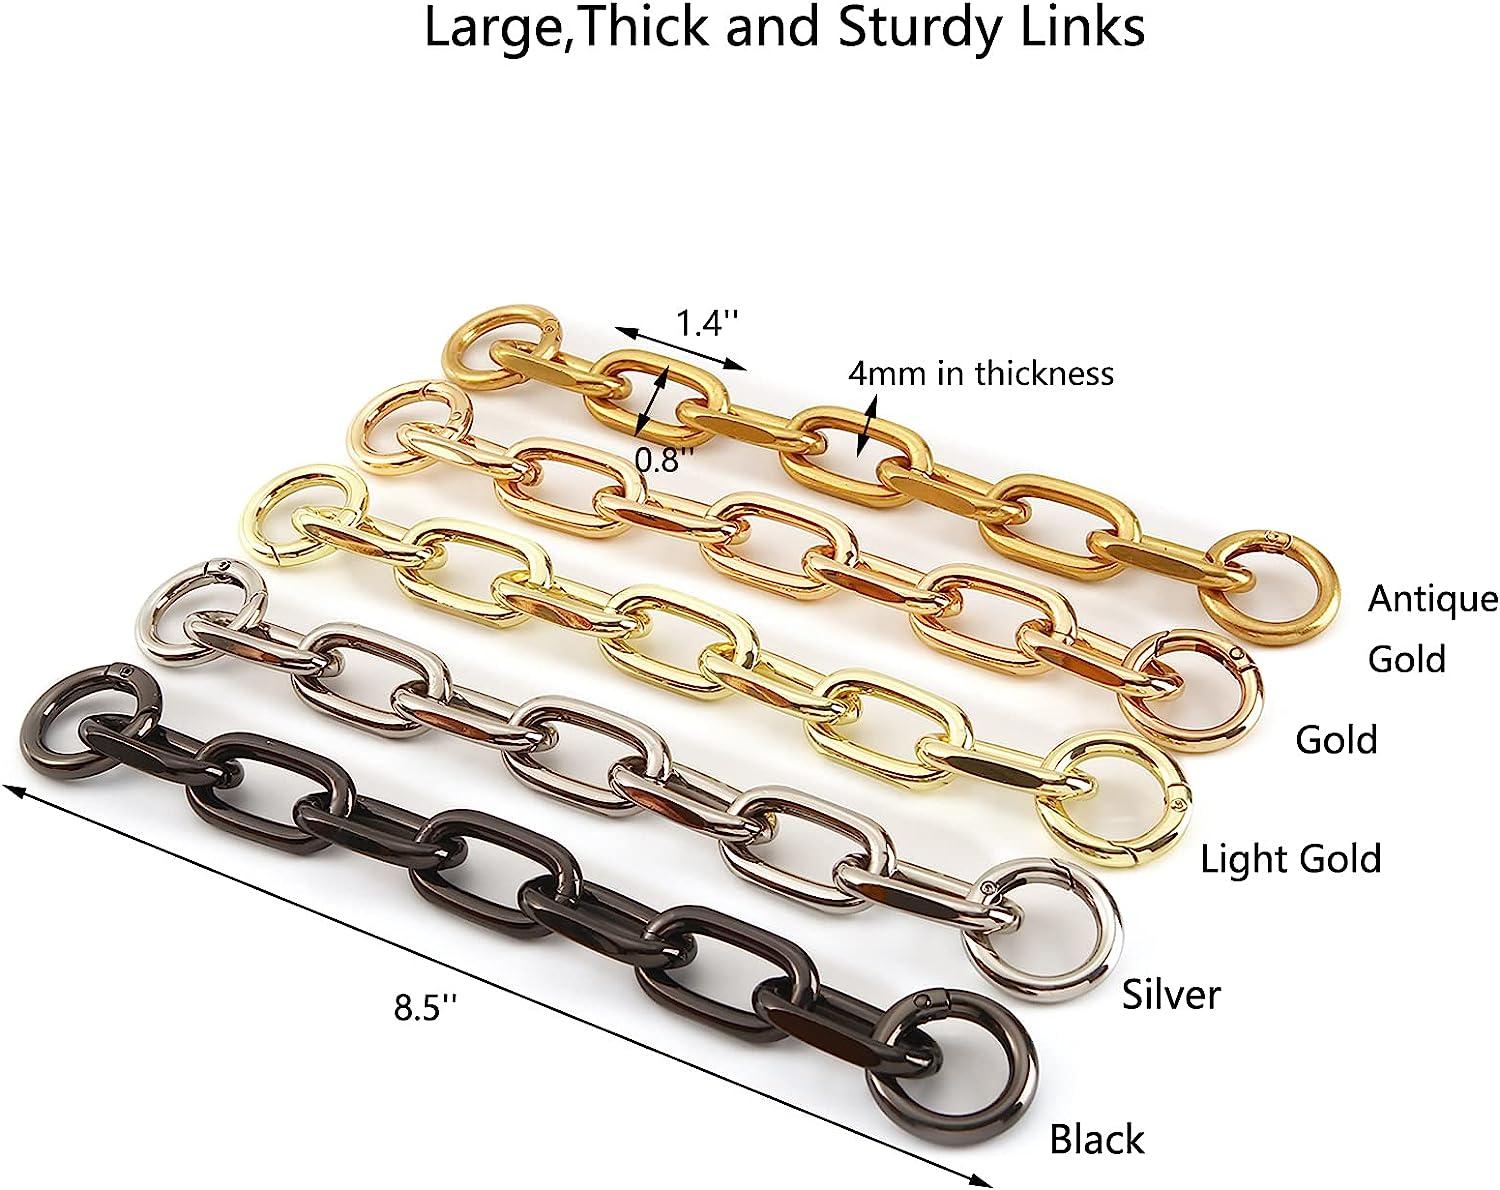  Metal Purse Chain Strap Extender for Accessory Charms,Lengthen  Crossbody Shoulder Handbags Strap(No.1 Light Gold)